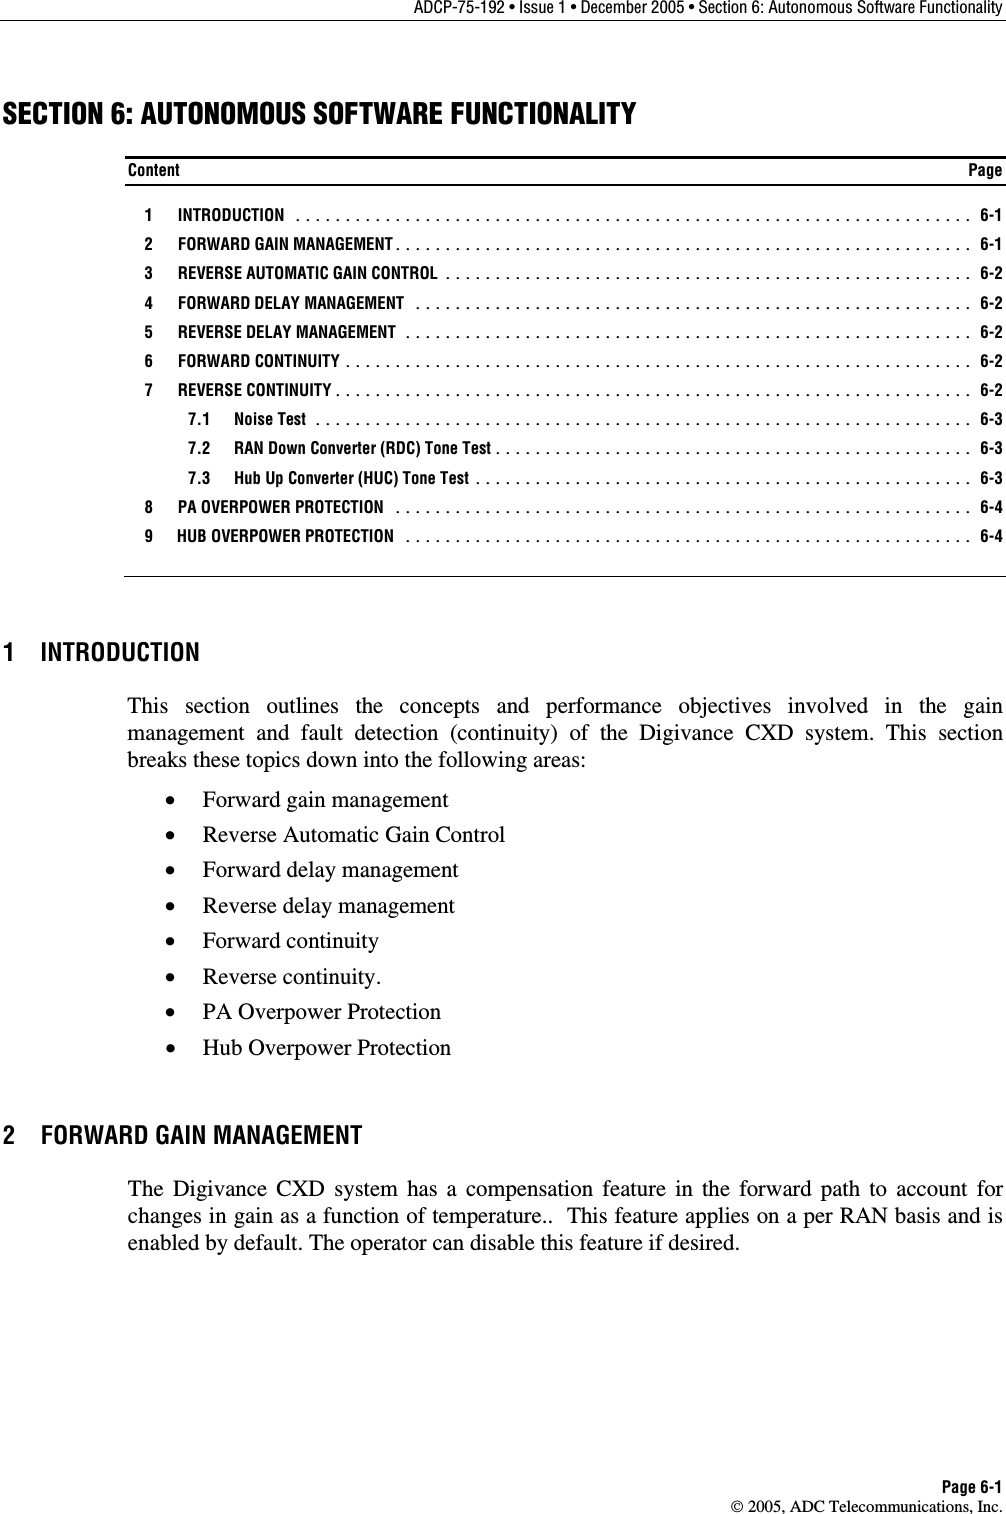 ADCP-75-192 • Issue 1 • December 2005 • Section 6: Autonomous Software Functionality Page 6-1  2005, ADC Telecommunications, Inc. SECTION 6: AUTONOMOUS SOFTWARE FUNCTIONALITY Content  Page  1  INTRODUCTION .................................................................... 6-1  2  FORWARD GAIN MANAGEMENT.......................................................... 6-1   3  REVERSE AUTOMATIC GAIN CONTROL ..................................................... 6-2  4  FORWARD DELAY MANAGEMENT ........................................................ 6-2  5  REVERSE DELAY MANAGEMENT ......................................................... 6-2  6  FORWARD CONTINUITY ............................................................... 6-2  7  REVERSE CONTINUITY................................................................ 6-2  7.1 Noise Test .................................................................. 6-3   7.2  RAN Down Converter (RDC) Tone Test................................................ 6-3   7.3  Hub Up Converter (HUC) Tone Test .................................................. 6-3   8  PA OVERPOWER PROTECTION .......................................................... 6-4   9  HUB OVERPOWER PROTECTION ......................................................... 6-4 1 INTRODUCTION This section outlines the concepts and performance objectives involved in the gain management and fault detection (continuity) of the Digivance CXD system. This section breaks these topics down into the following areas: •  Forward gain management •  Reverse Automatic Gain Control •  Forward delay management •  Reverse delay management •  Forward continuity •  Reverse continuity. •  PA Overpower Protection •  Hub Overpower Protection 2  FORWARD GAIN MANAGEMENT The Digivance CXD system has a compensation feature in the forward path to account for changes in gain as a function of temperature..  This feature applies on a per RAN basis and is enabled by default. The operator can disable this feature if desired. 